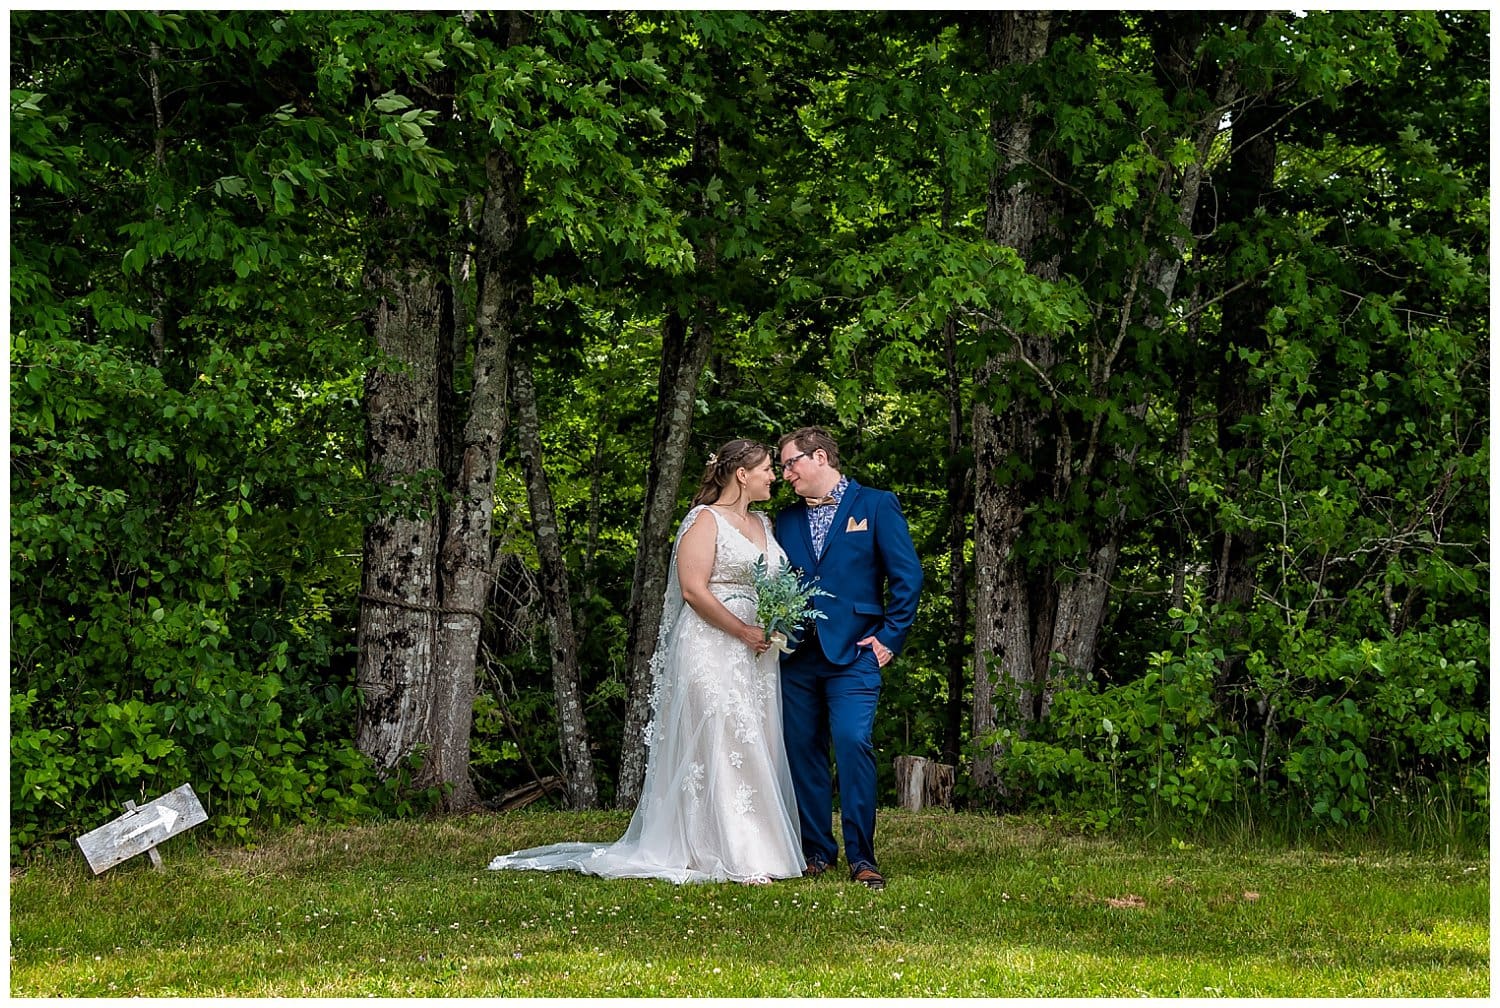 A Beautiful Wedding at the Barn at Sadie Belle Farm with Randi and Tristan